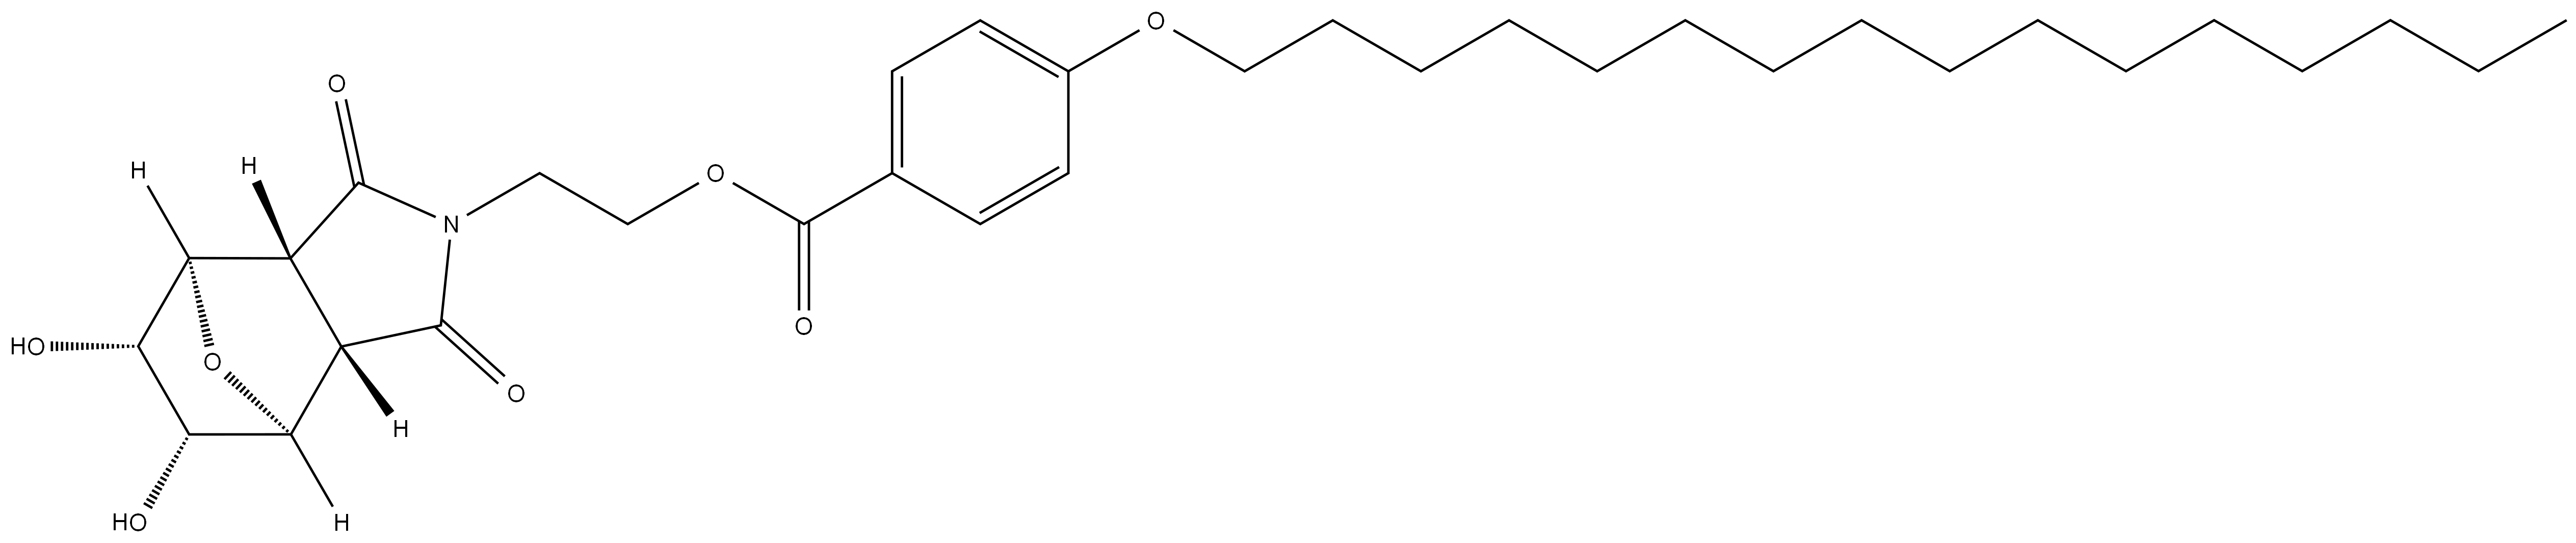 2-((3aR,4R,5S,6R,7S,7aS)-5,6-dihydroxy-1,3-dioxohexahydro-1H-4,7-epoxyisoindol-2(3H)-yl)ethyl 4-(hexadecyloxy)benzoate Structure